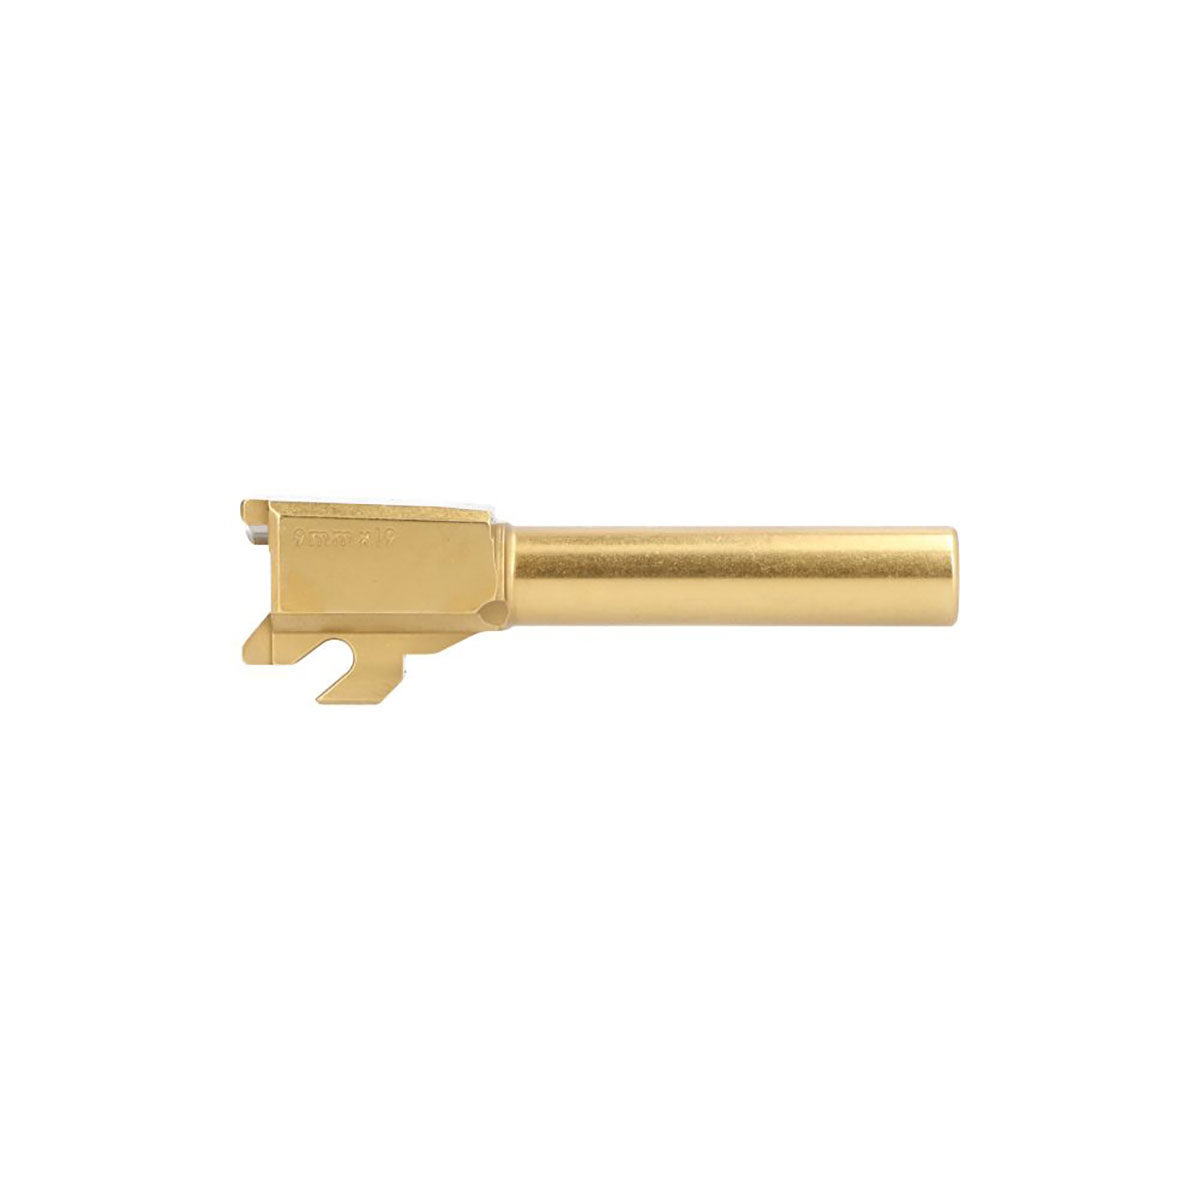 SIG SAUER, INC. - 9MM LUGER BARREL WITHOUT LCI FOR SIG SAUER® P320 COMPACT /CARRY